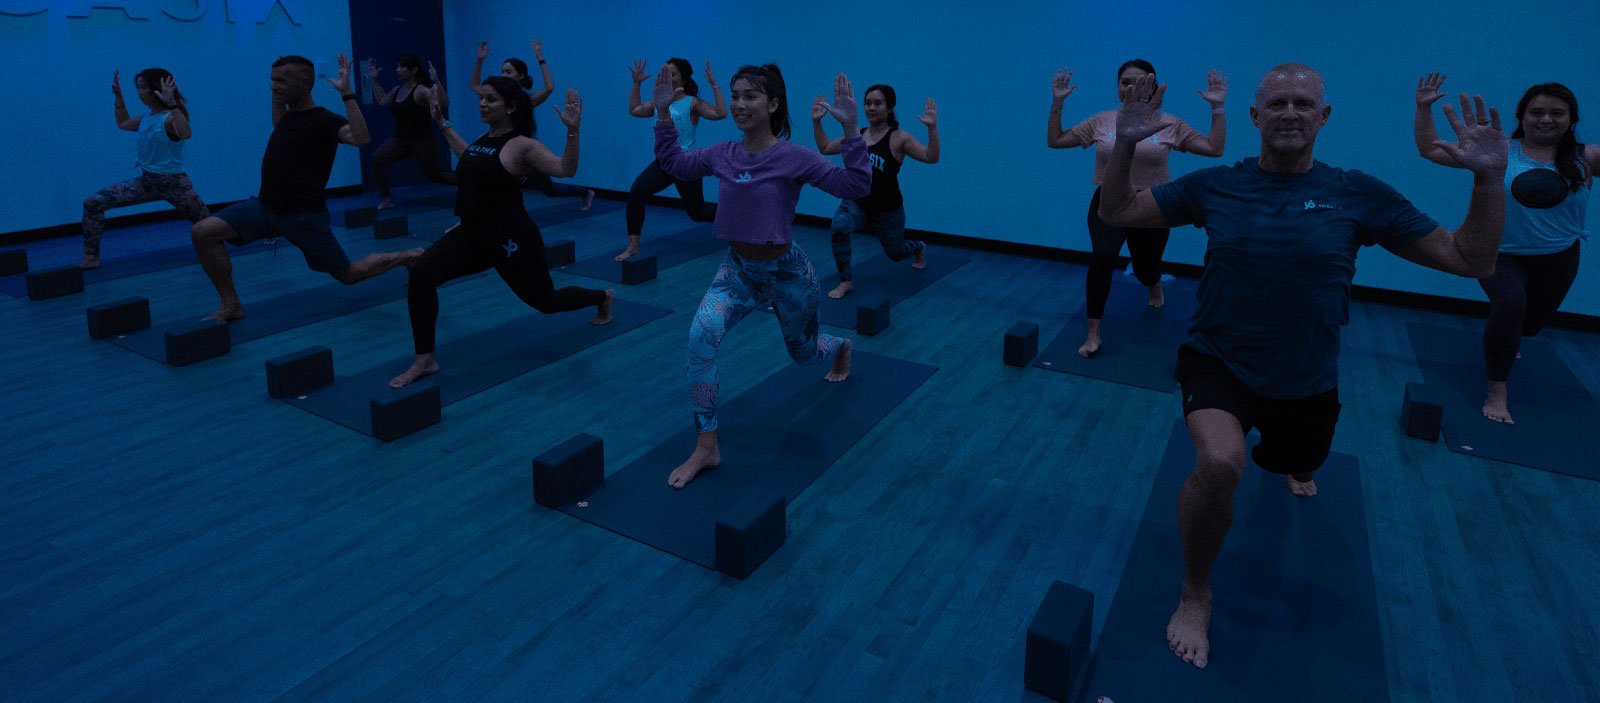 https://www.yogasix.com/hubfs/Resized%20Location%20Page%20Images/4_Studio-1-Banner.jpg